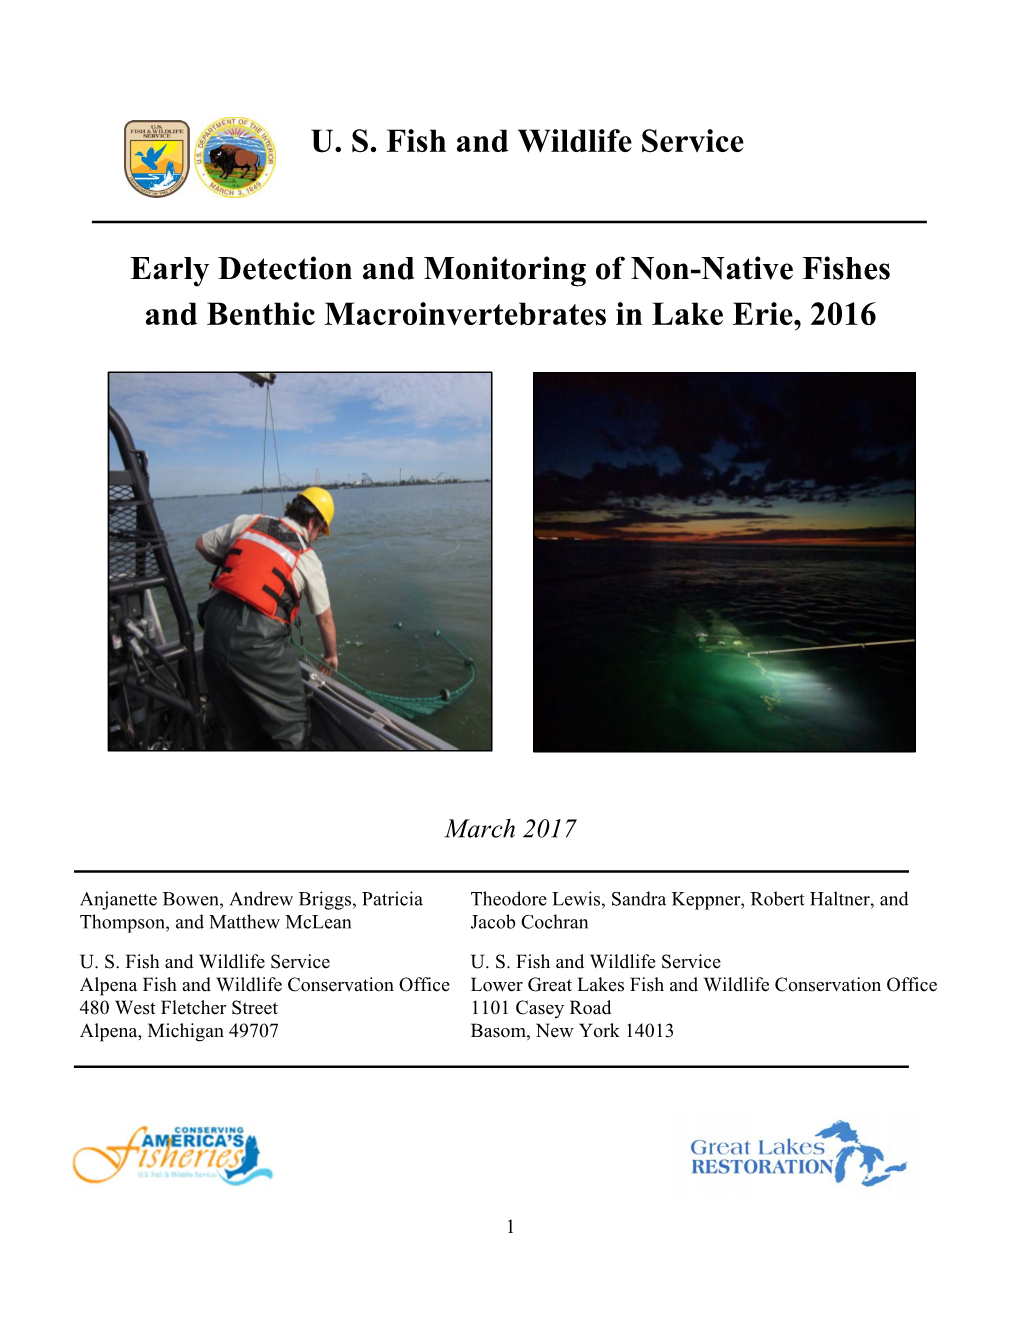 Report: Early Detection and Monitoring of Non-Native Fishes